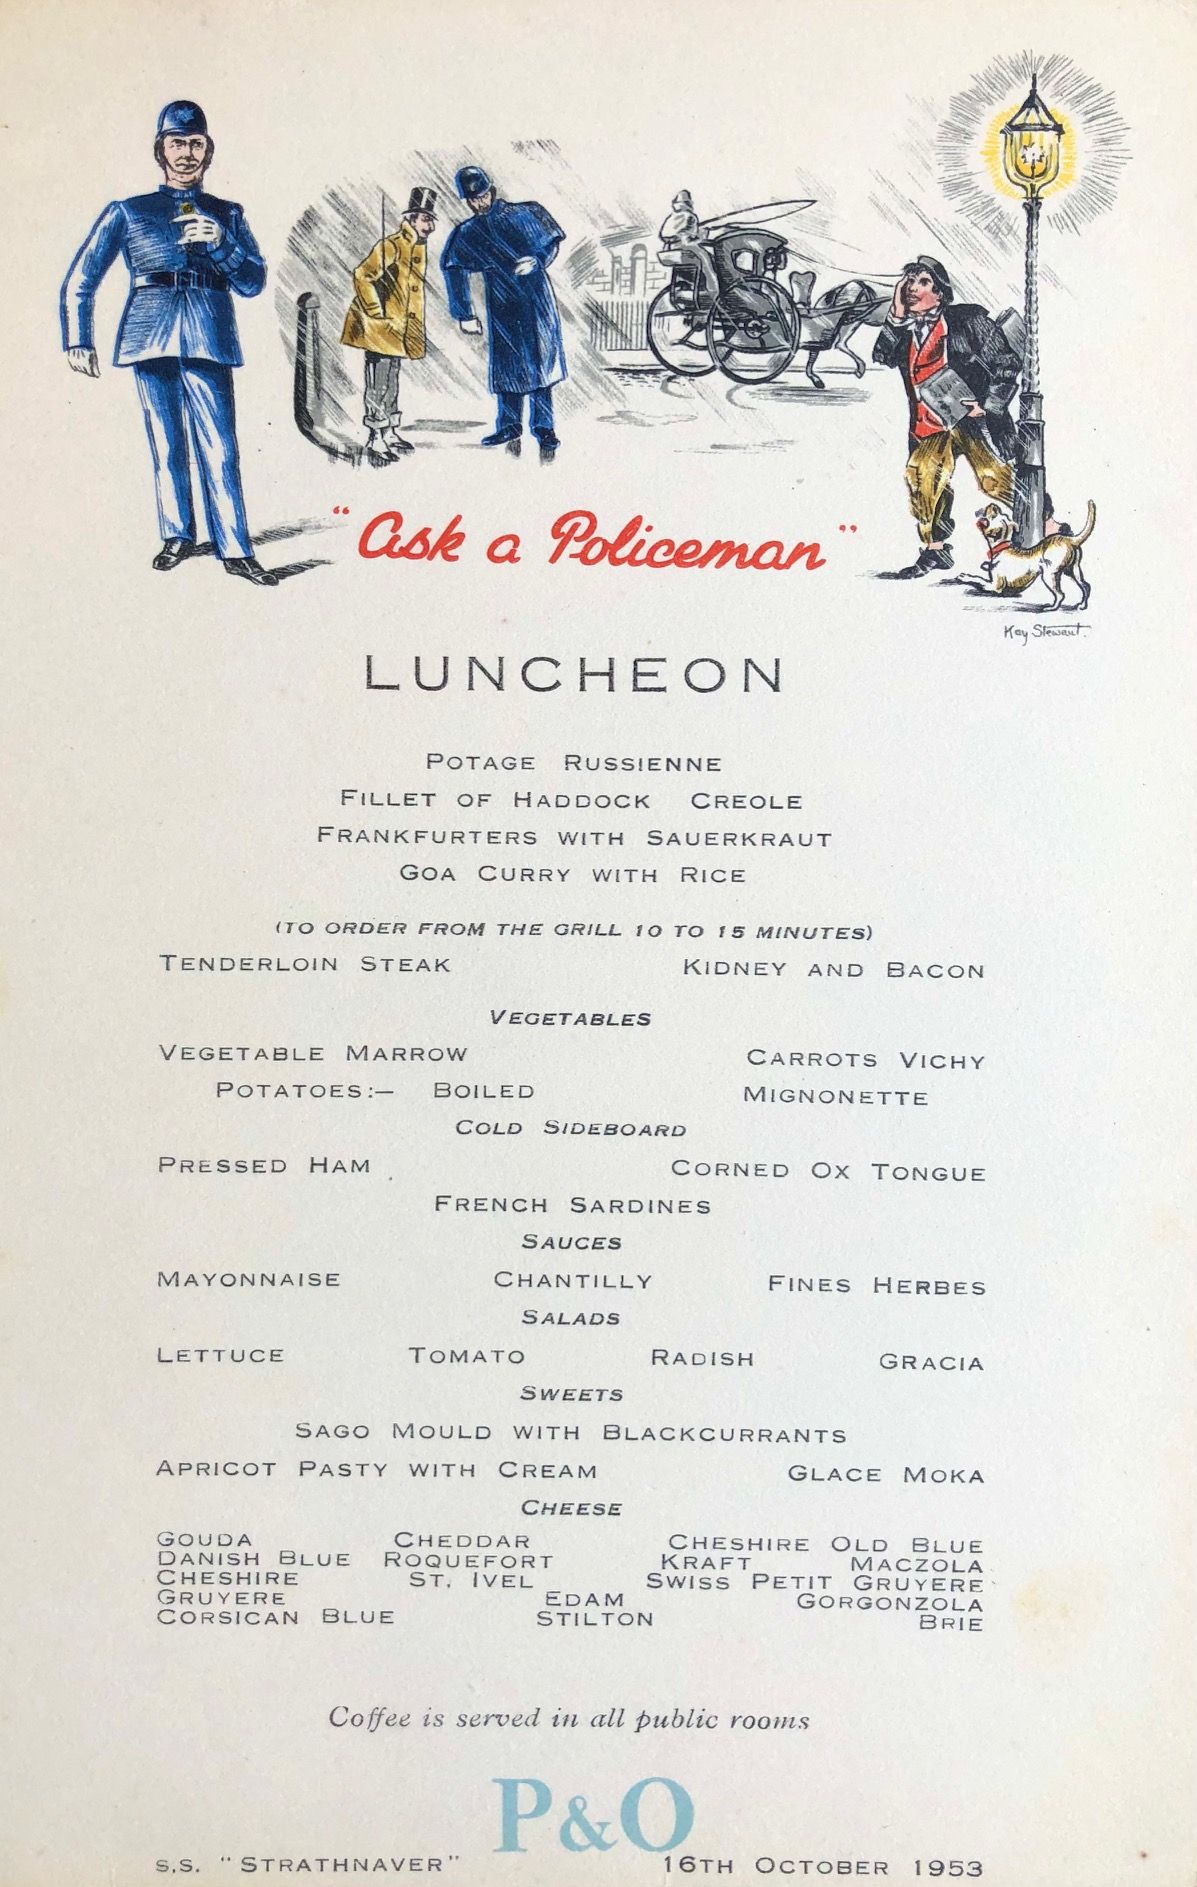 *NEW* P & O Lines. S.S. "Strathnaver" Luncheon Menu - Ask a Policeman